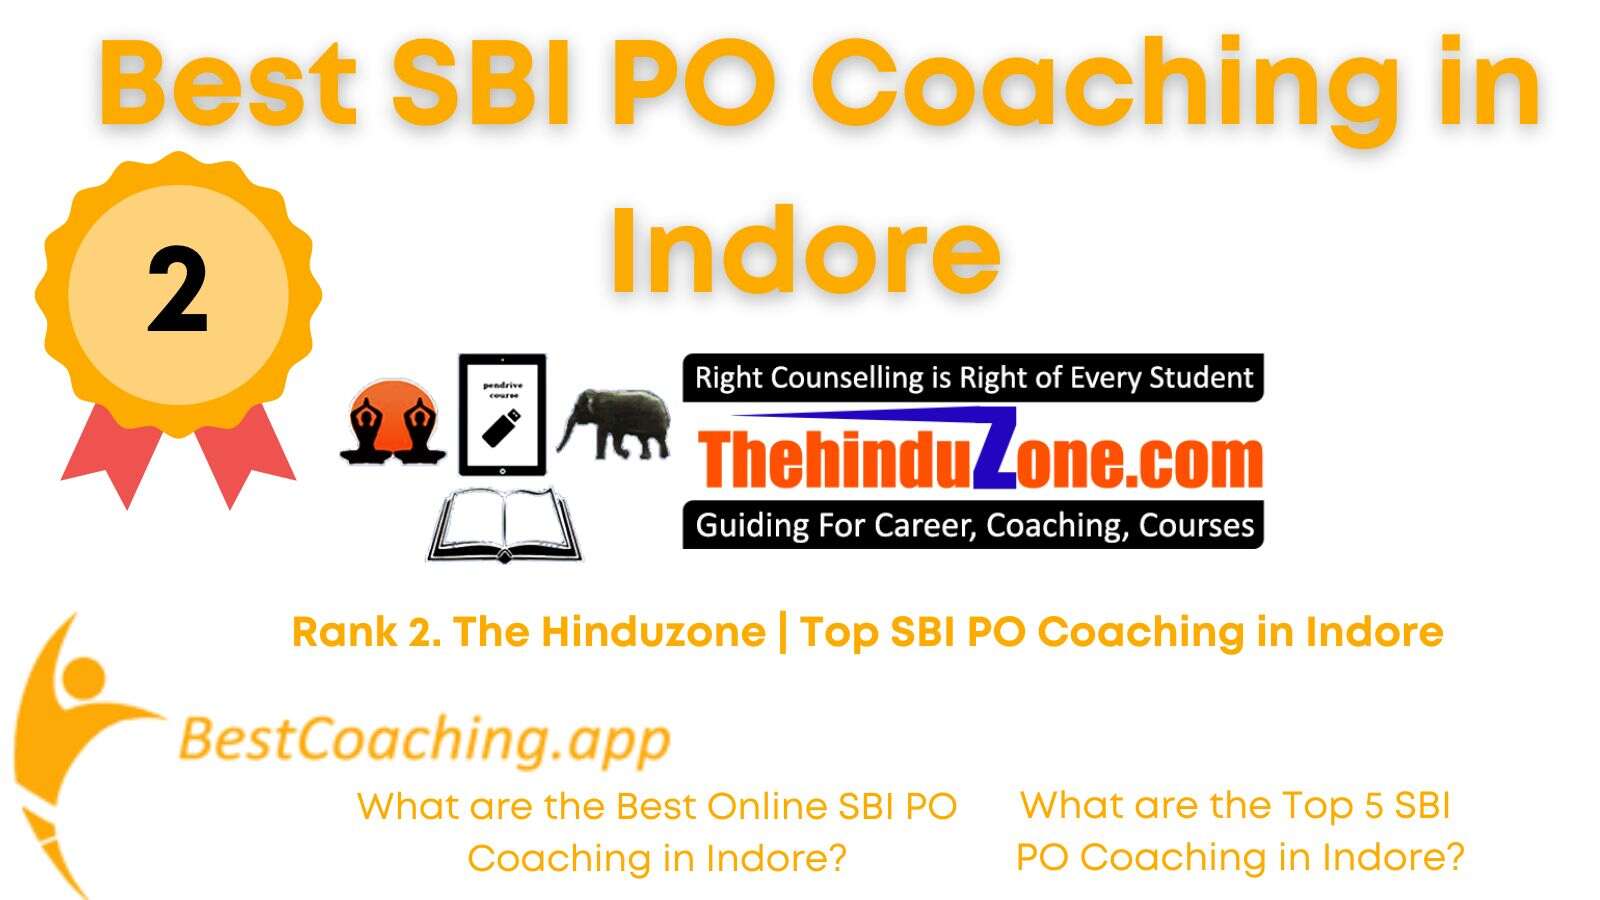 Rank 2. The Hinduzone | Top SBI PO Coaching in Indore